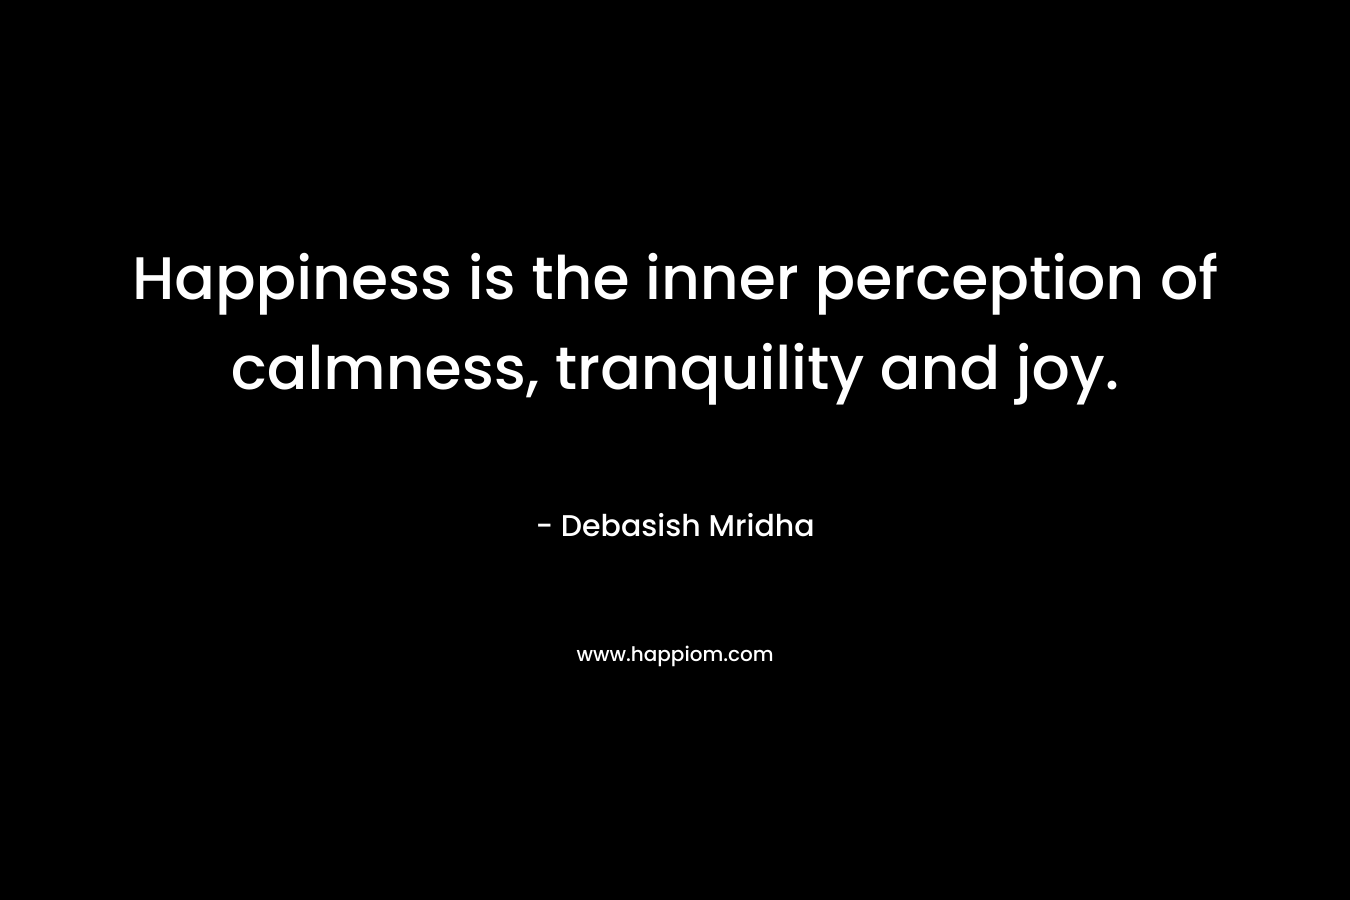 Happiness is the inner perception of calmness, tranquility and joy.